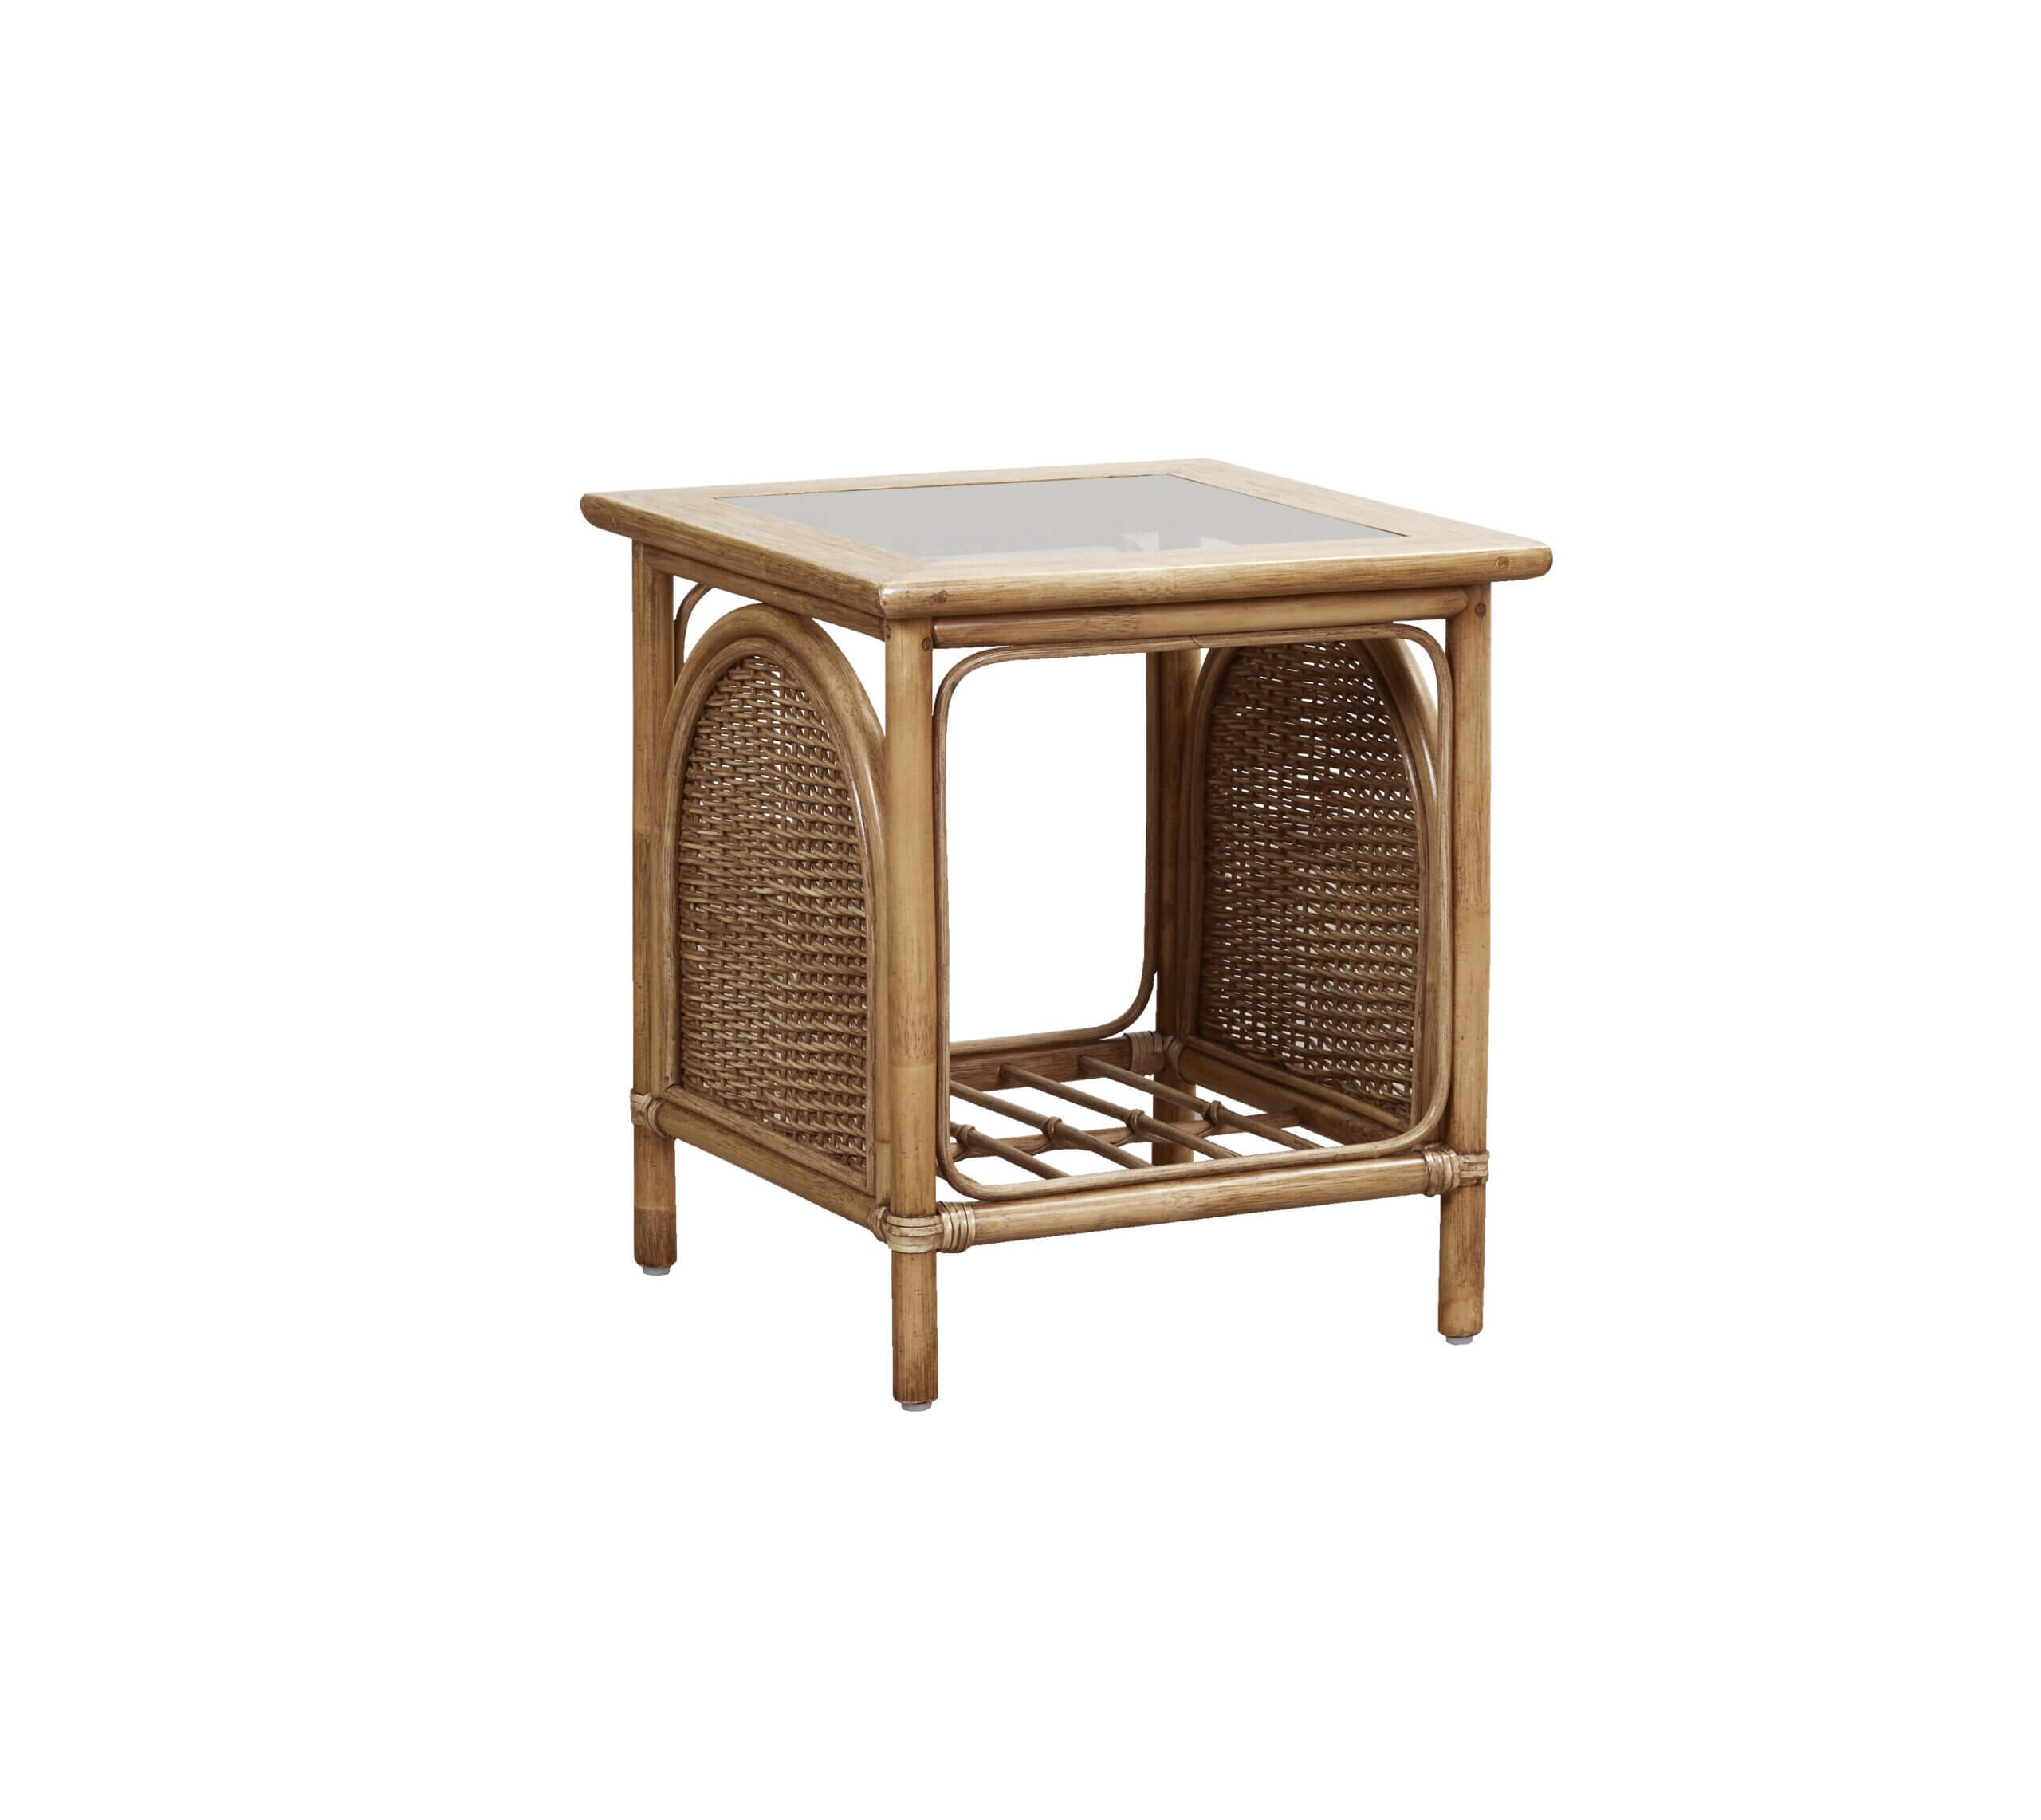 Showing image for Bari side table